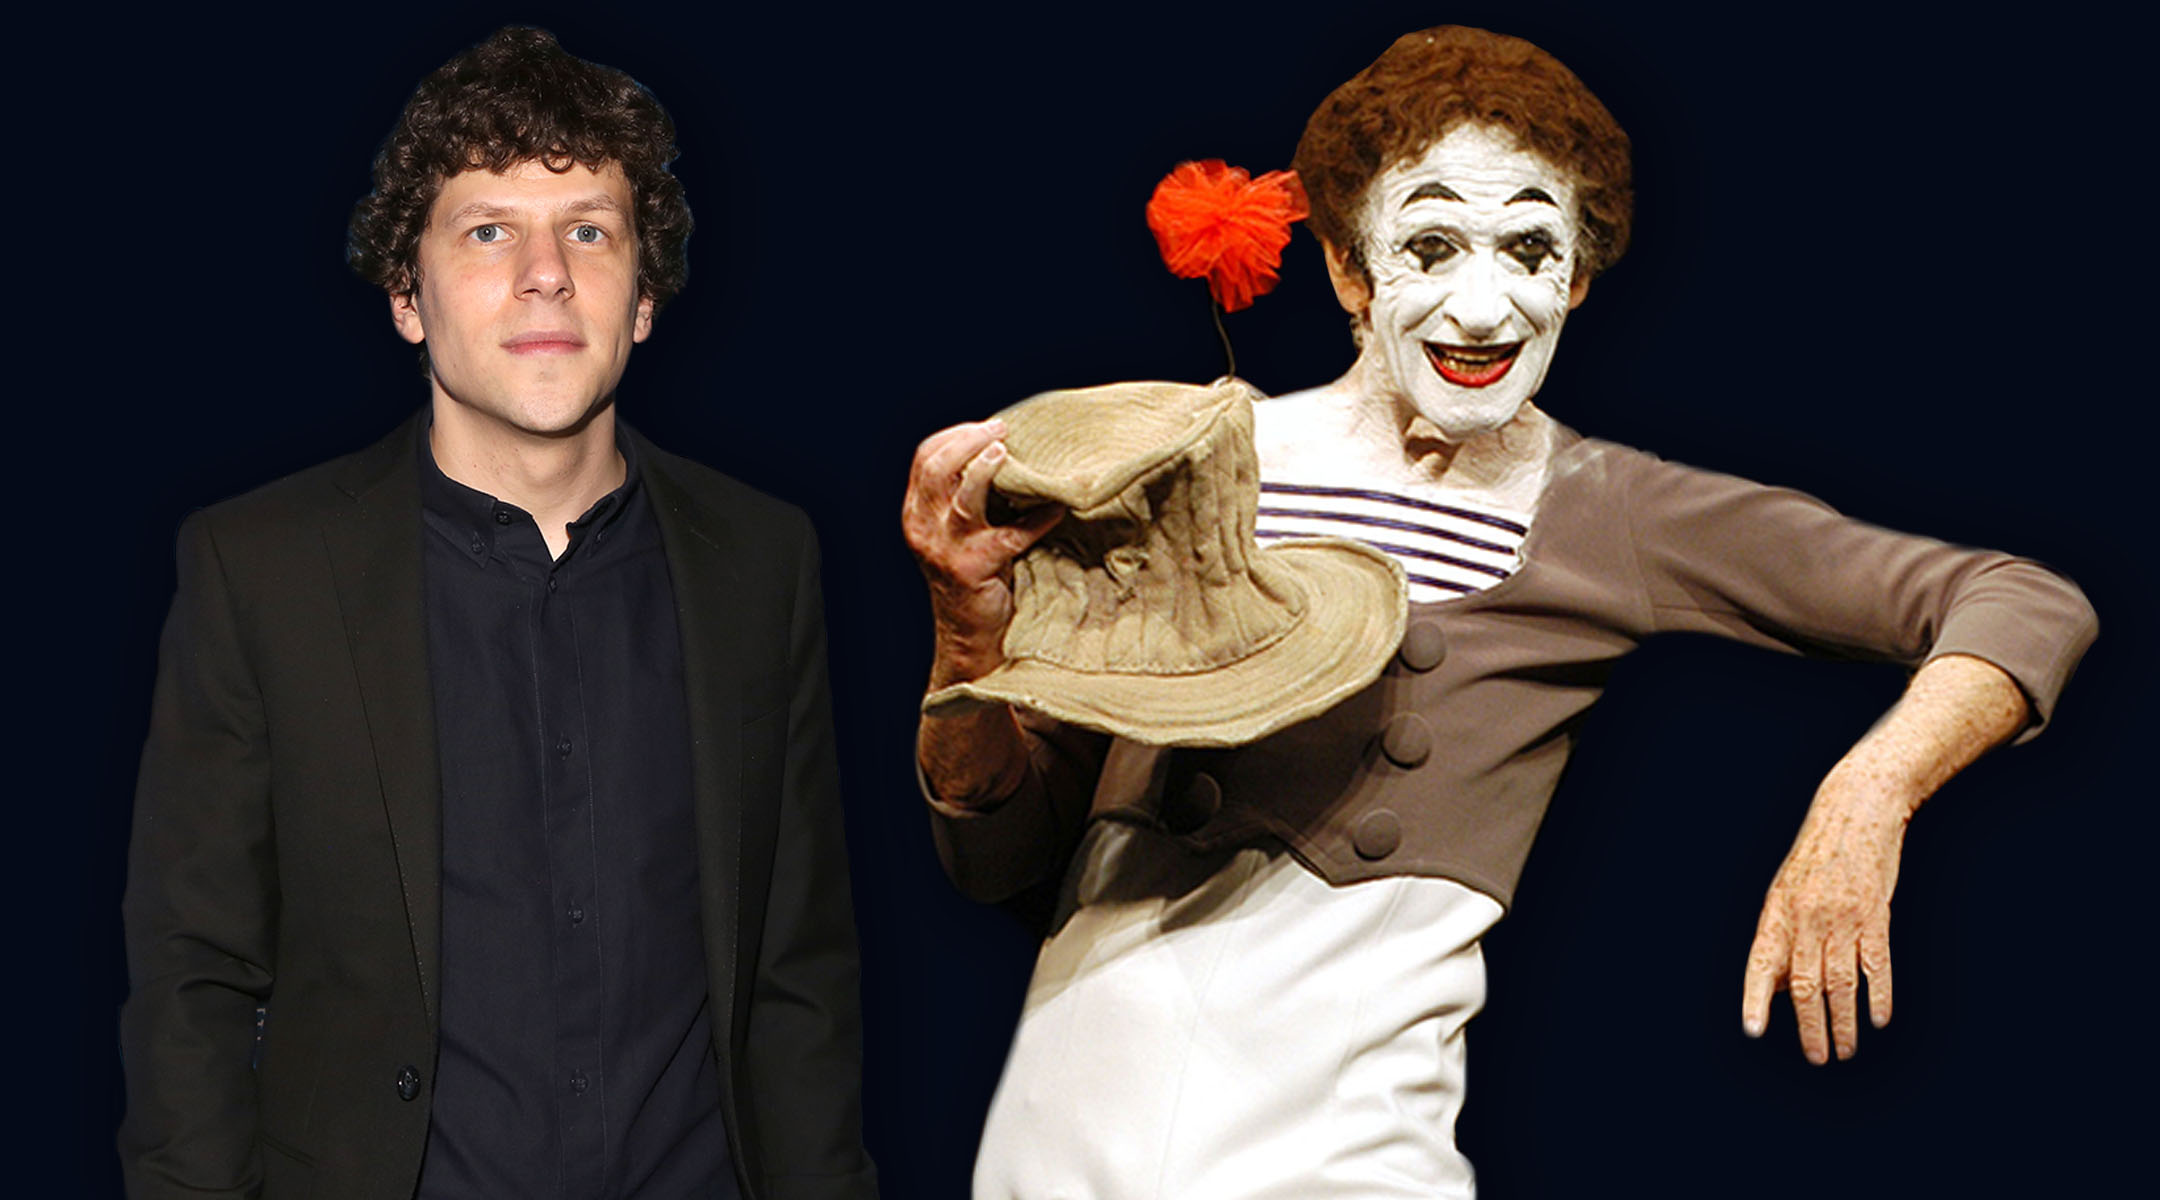 Jesse Eisenberg feels link to Marcel Marceau who he plays in new movie |  The Times of Israel